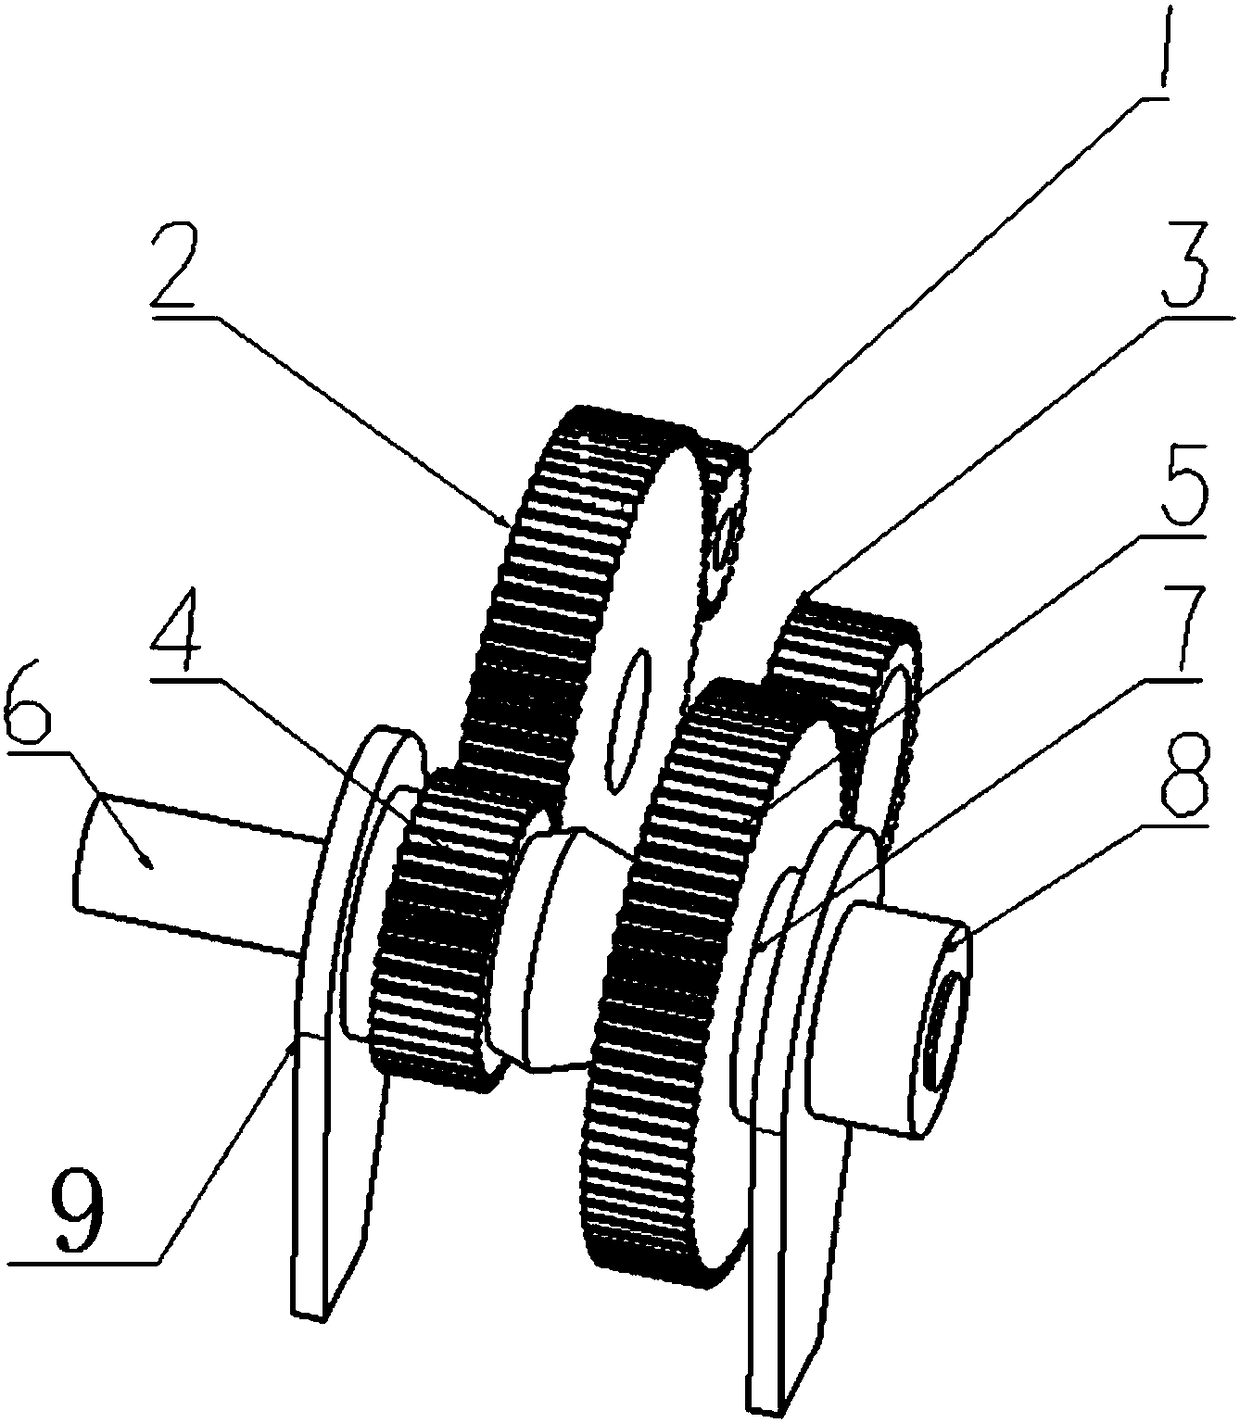 Gear speed reducer capable of achieving flexible impact